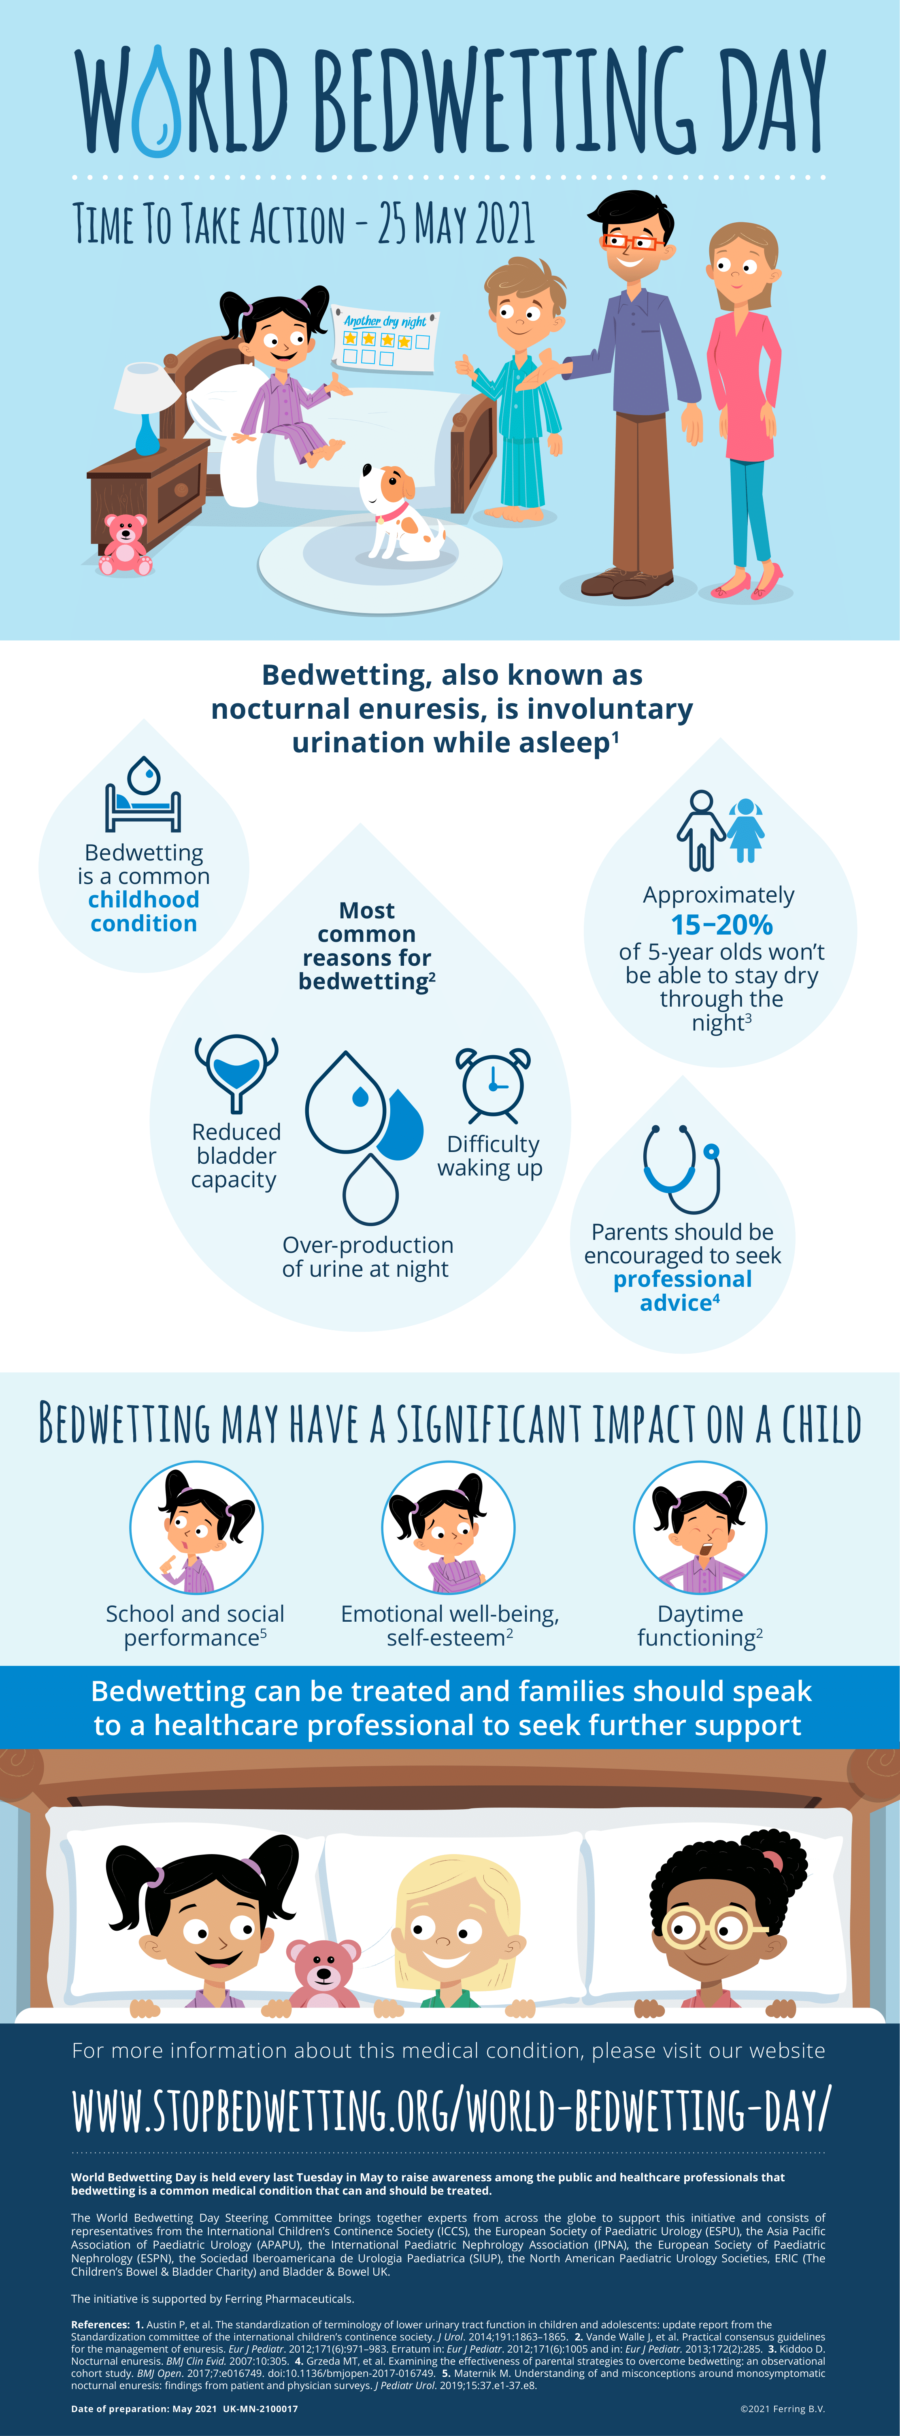 World Bedwetting Day 2021 infographic